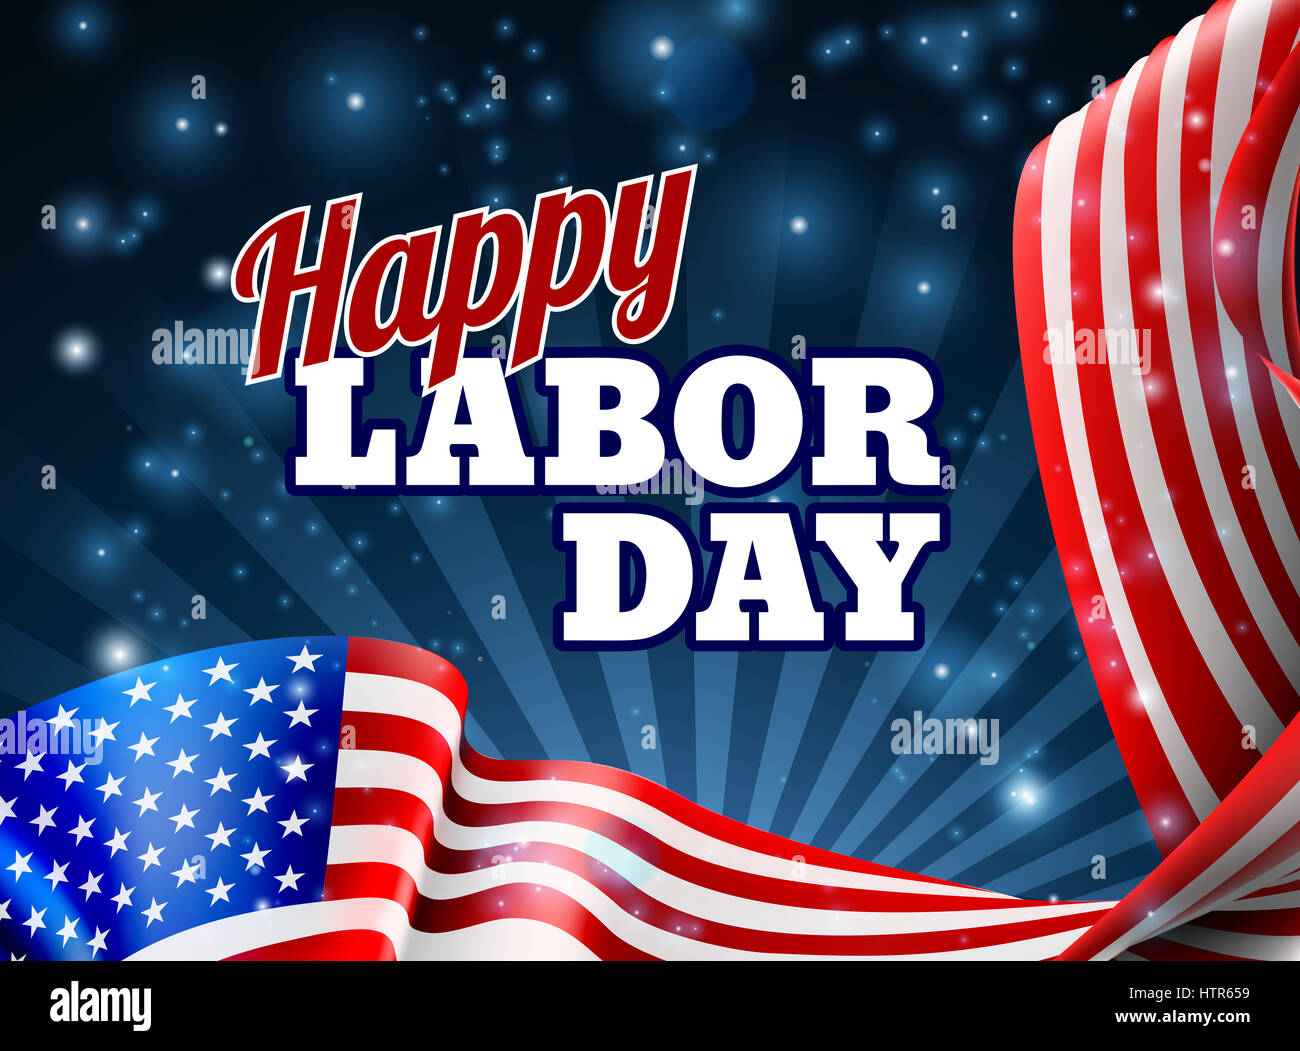 A Happy Labor Day design with an American flag banner border Stock Photo